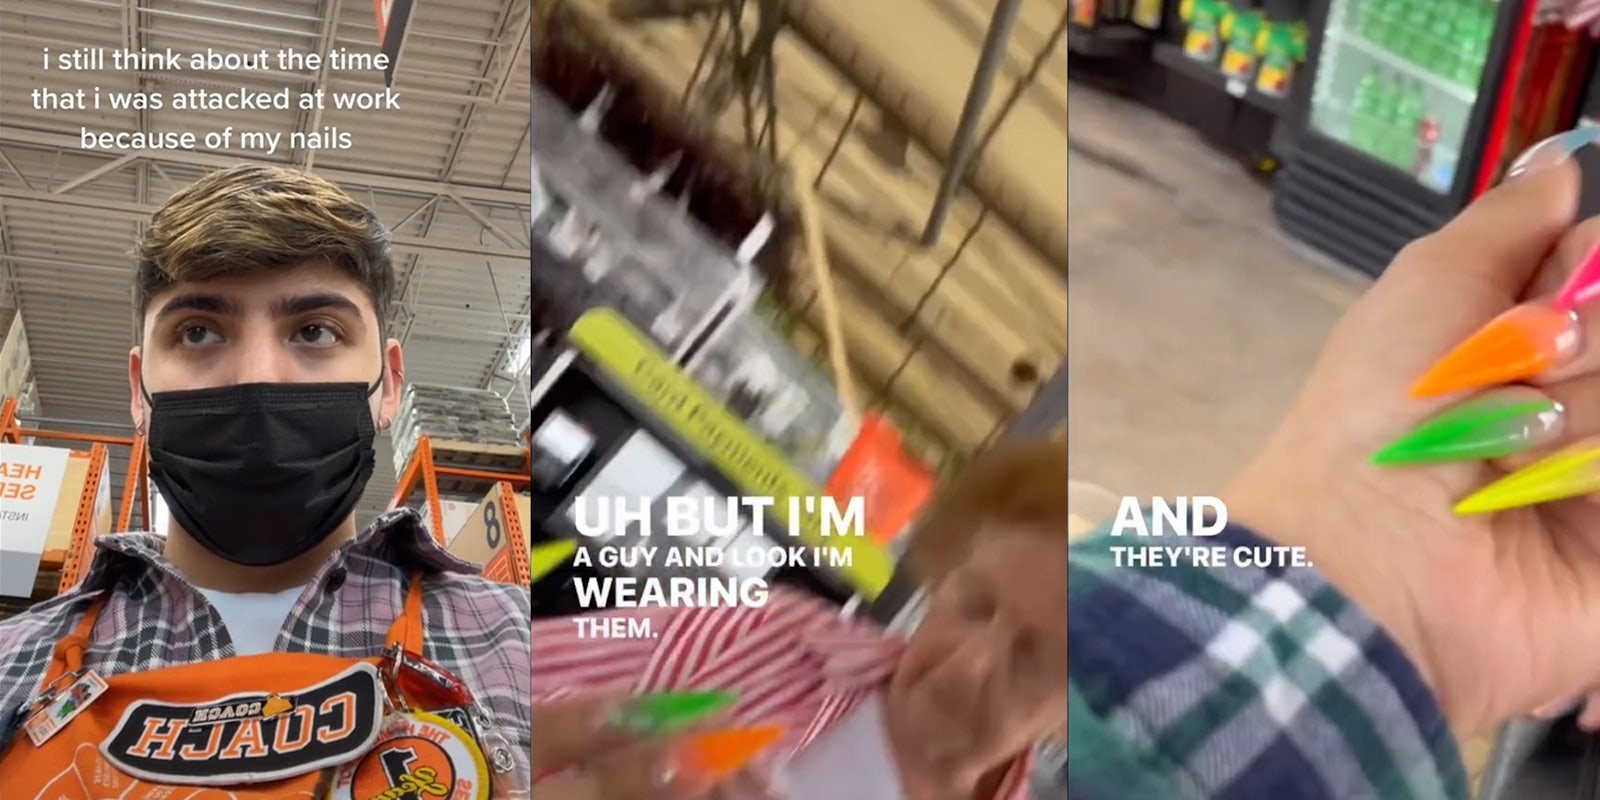 young man in home depot with caption 'i still think about the time that i was attacked at work because of my nails' (l) elderly woman with caption 'uh but i'm a guy and look i'm wearing them' (c) multicolored fake nails on hand with caption 'and they're cute' (r)